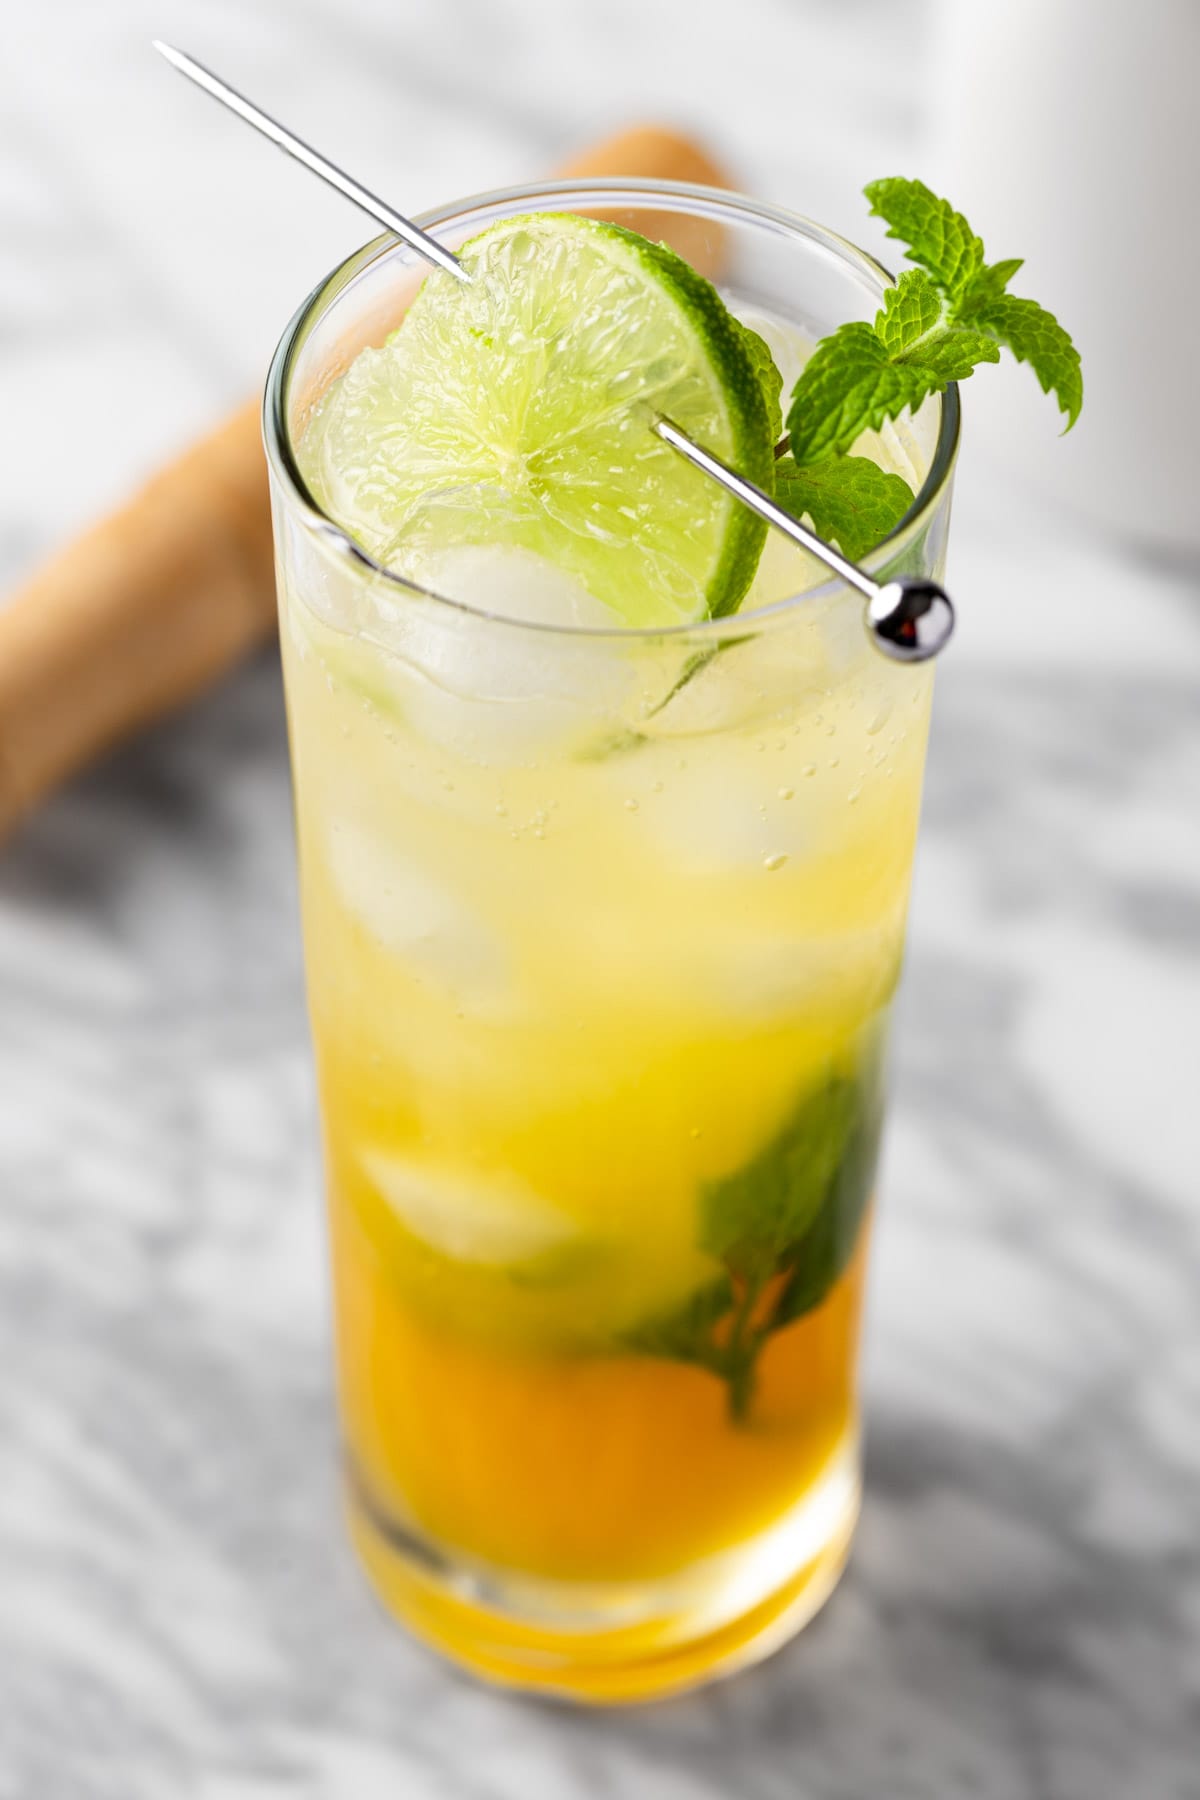 A passionfruit mojito mocktail garnished with a lime wheel and a sprig of mint.